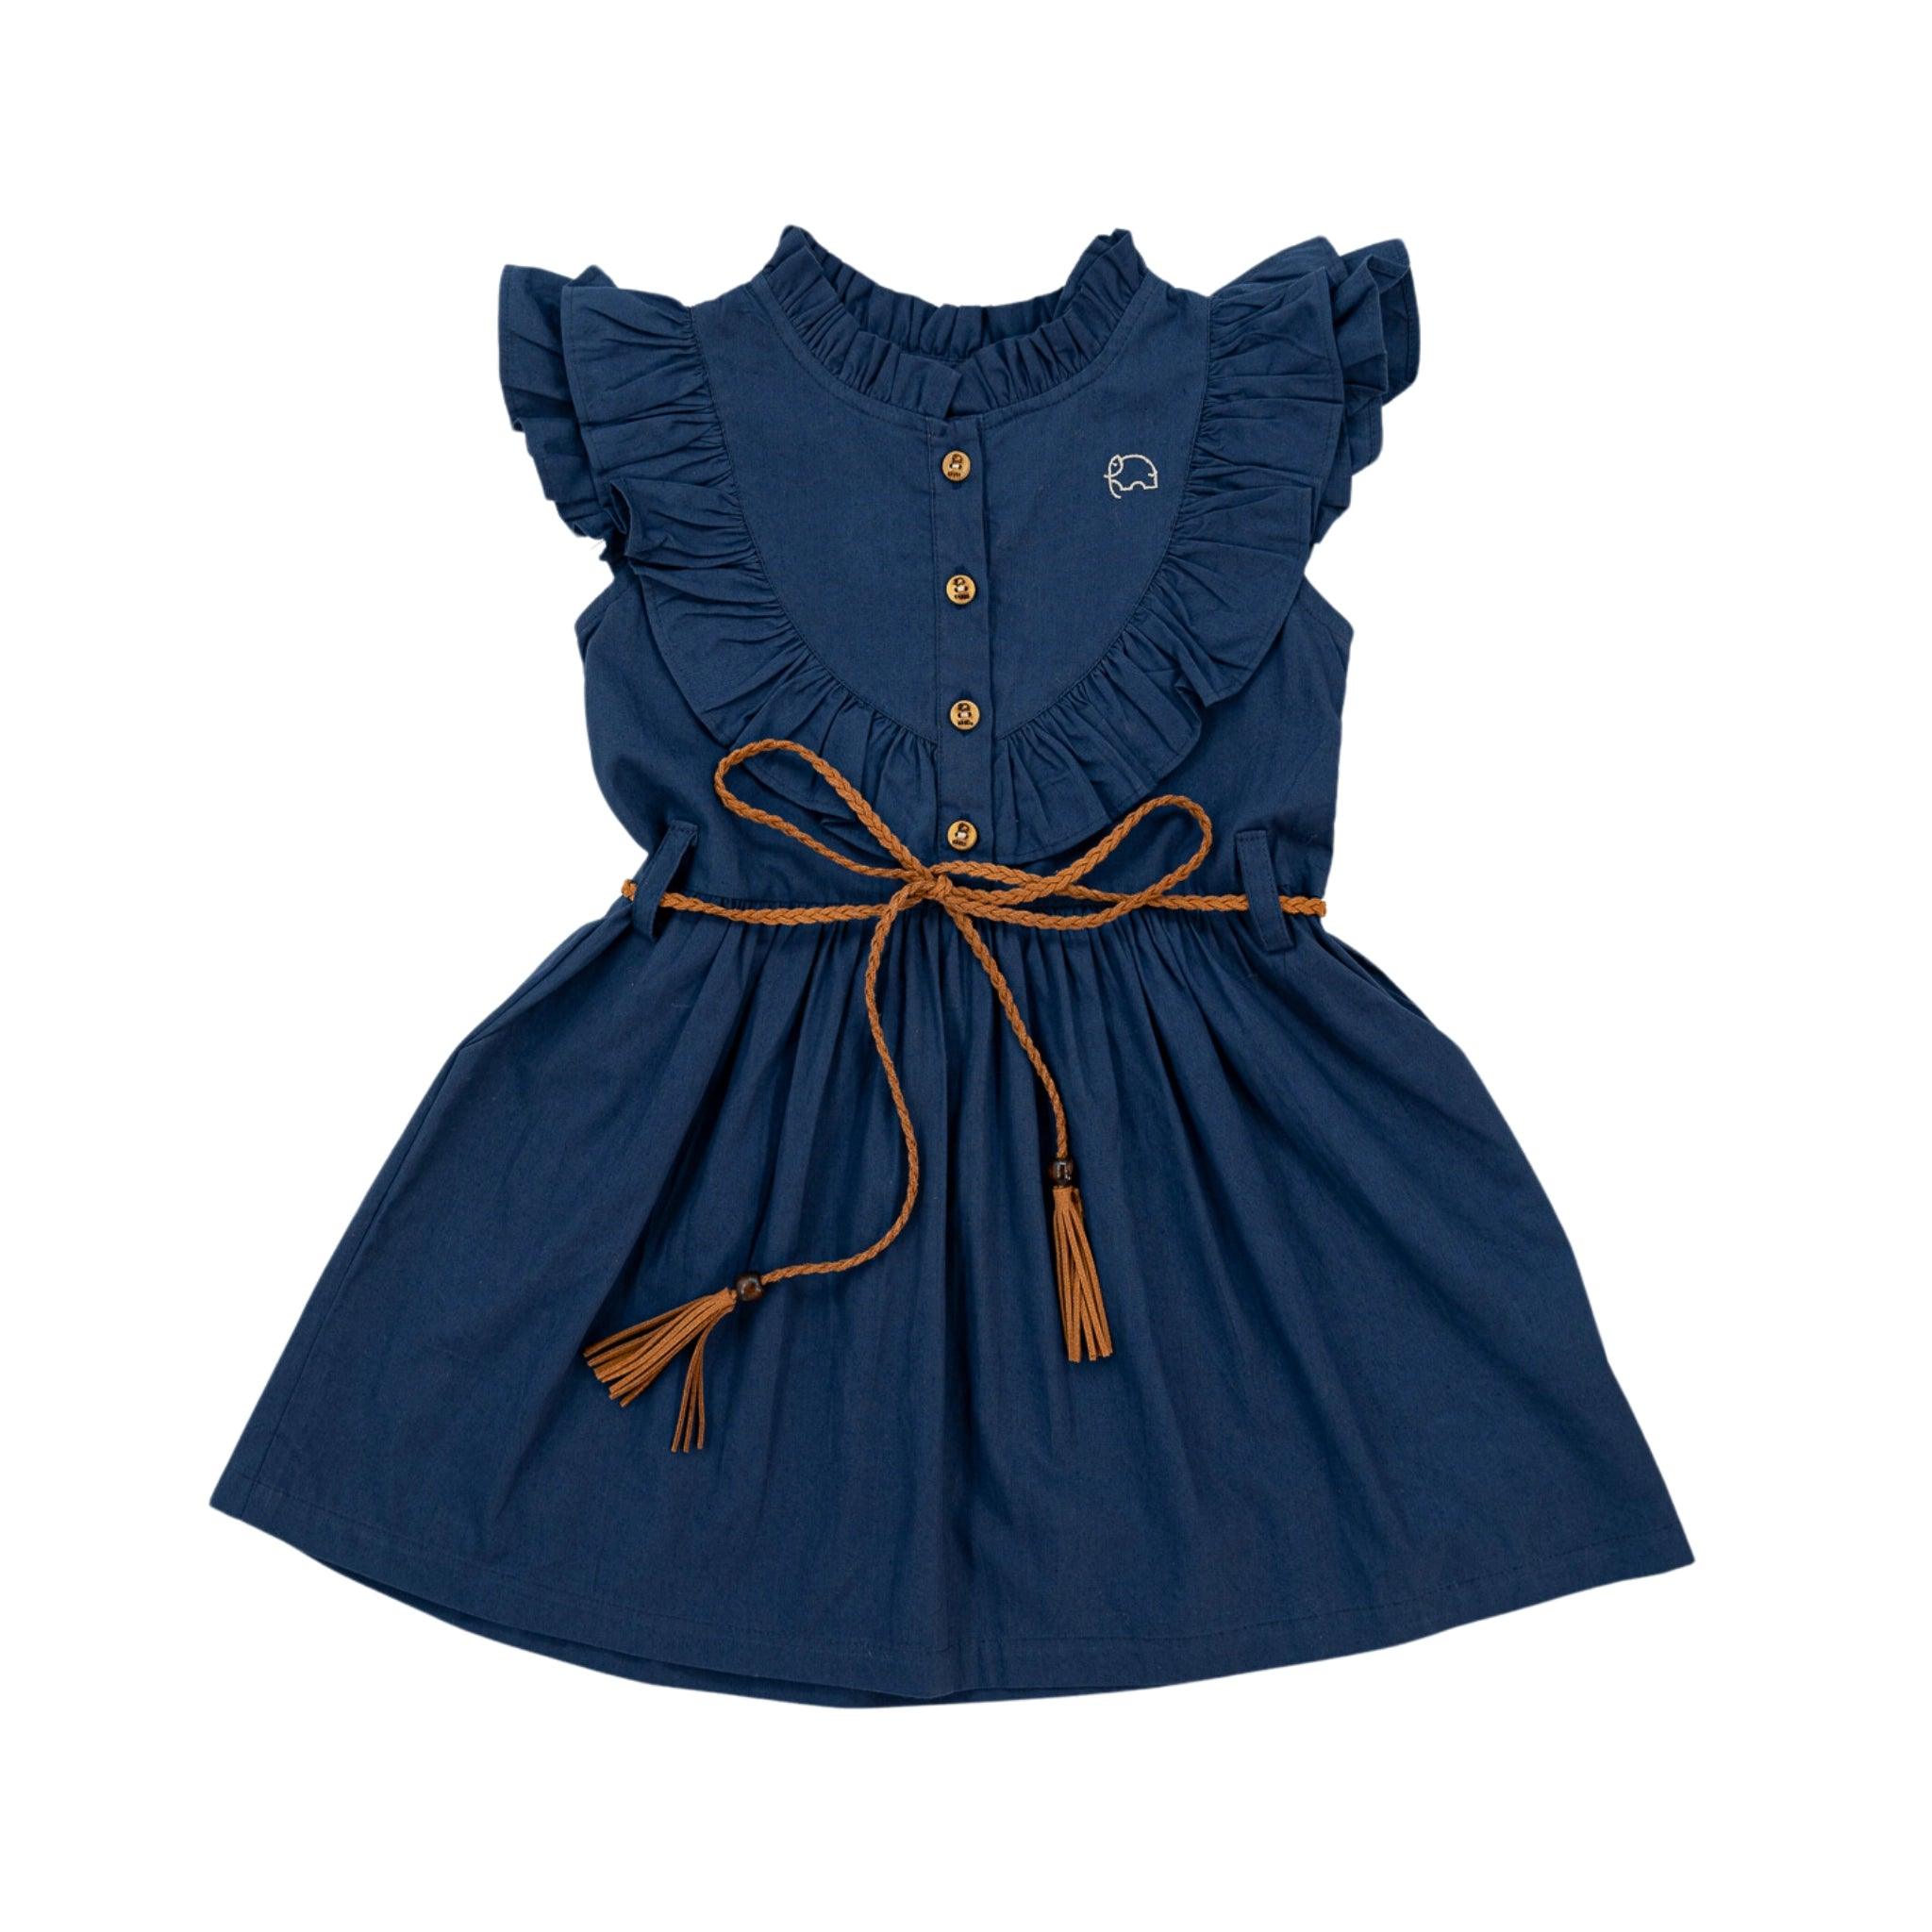 An eco-friendly Karee Navy Blue Butterfly Sleeve Cotton Dress, adorned with ruffles and tassels.